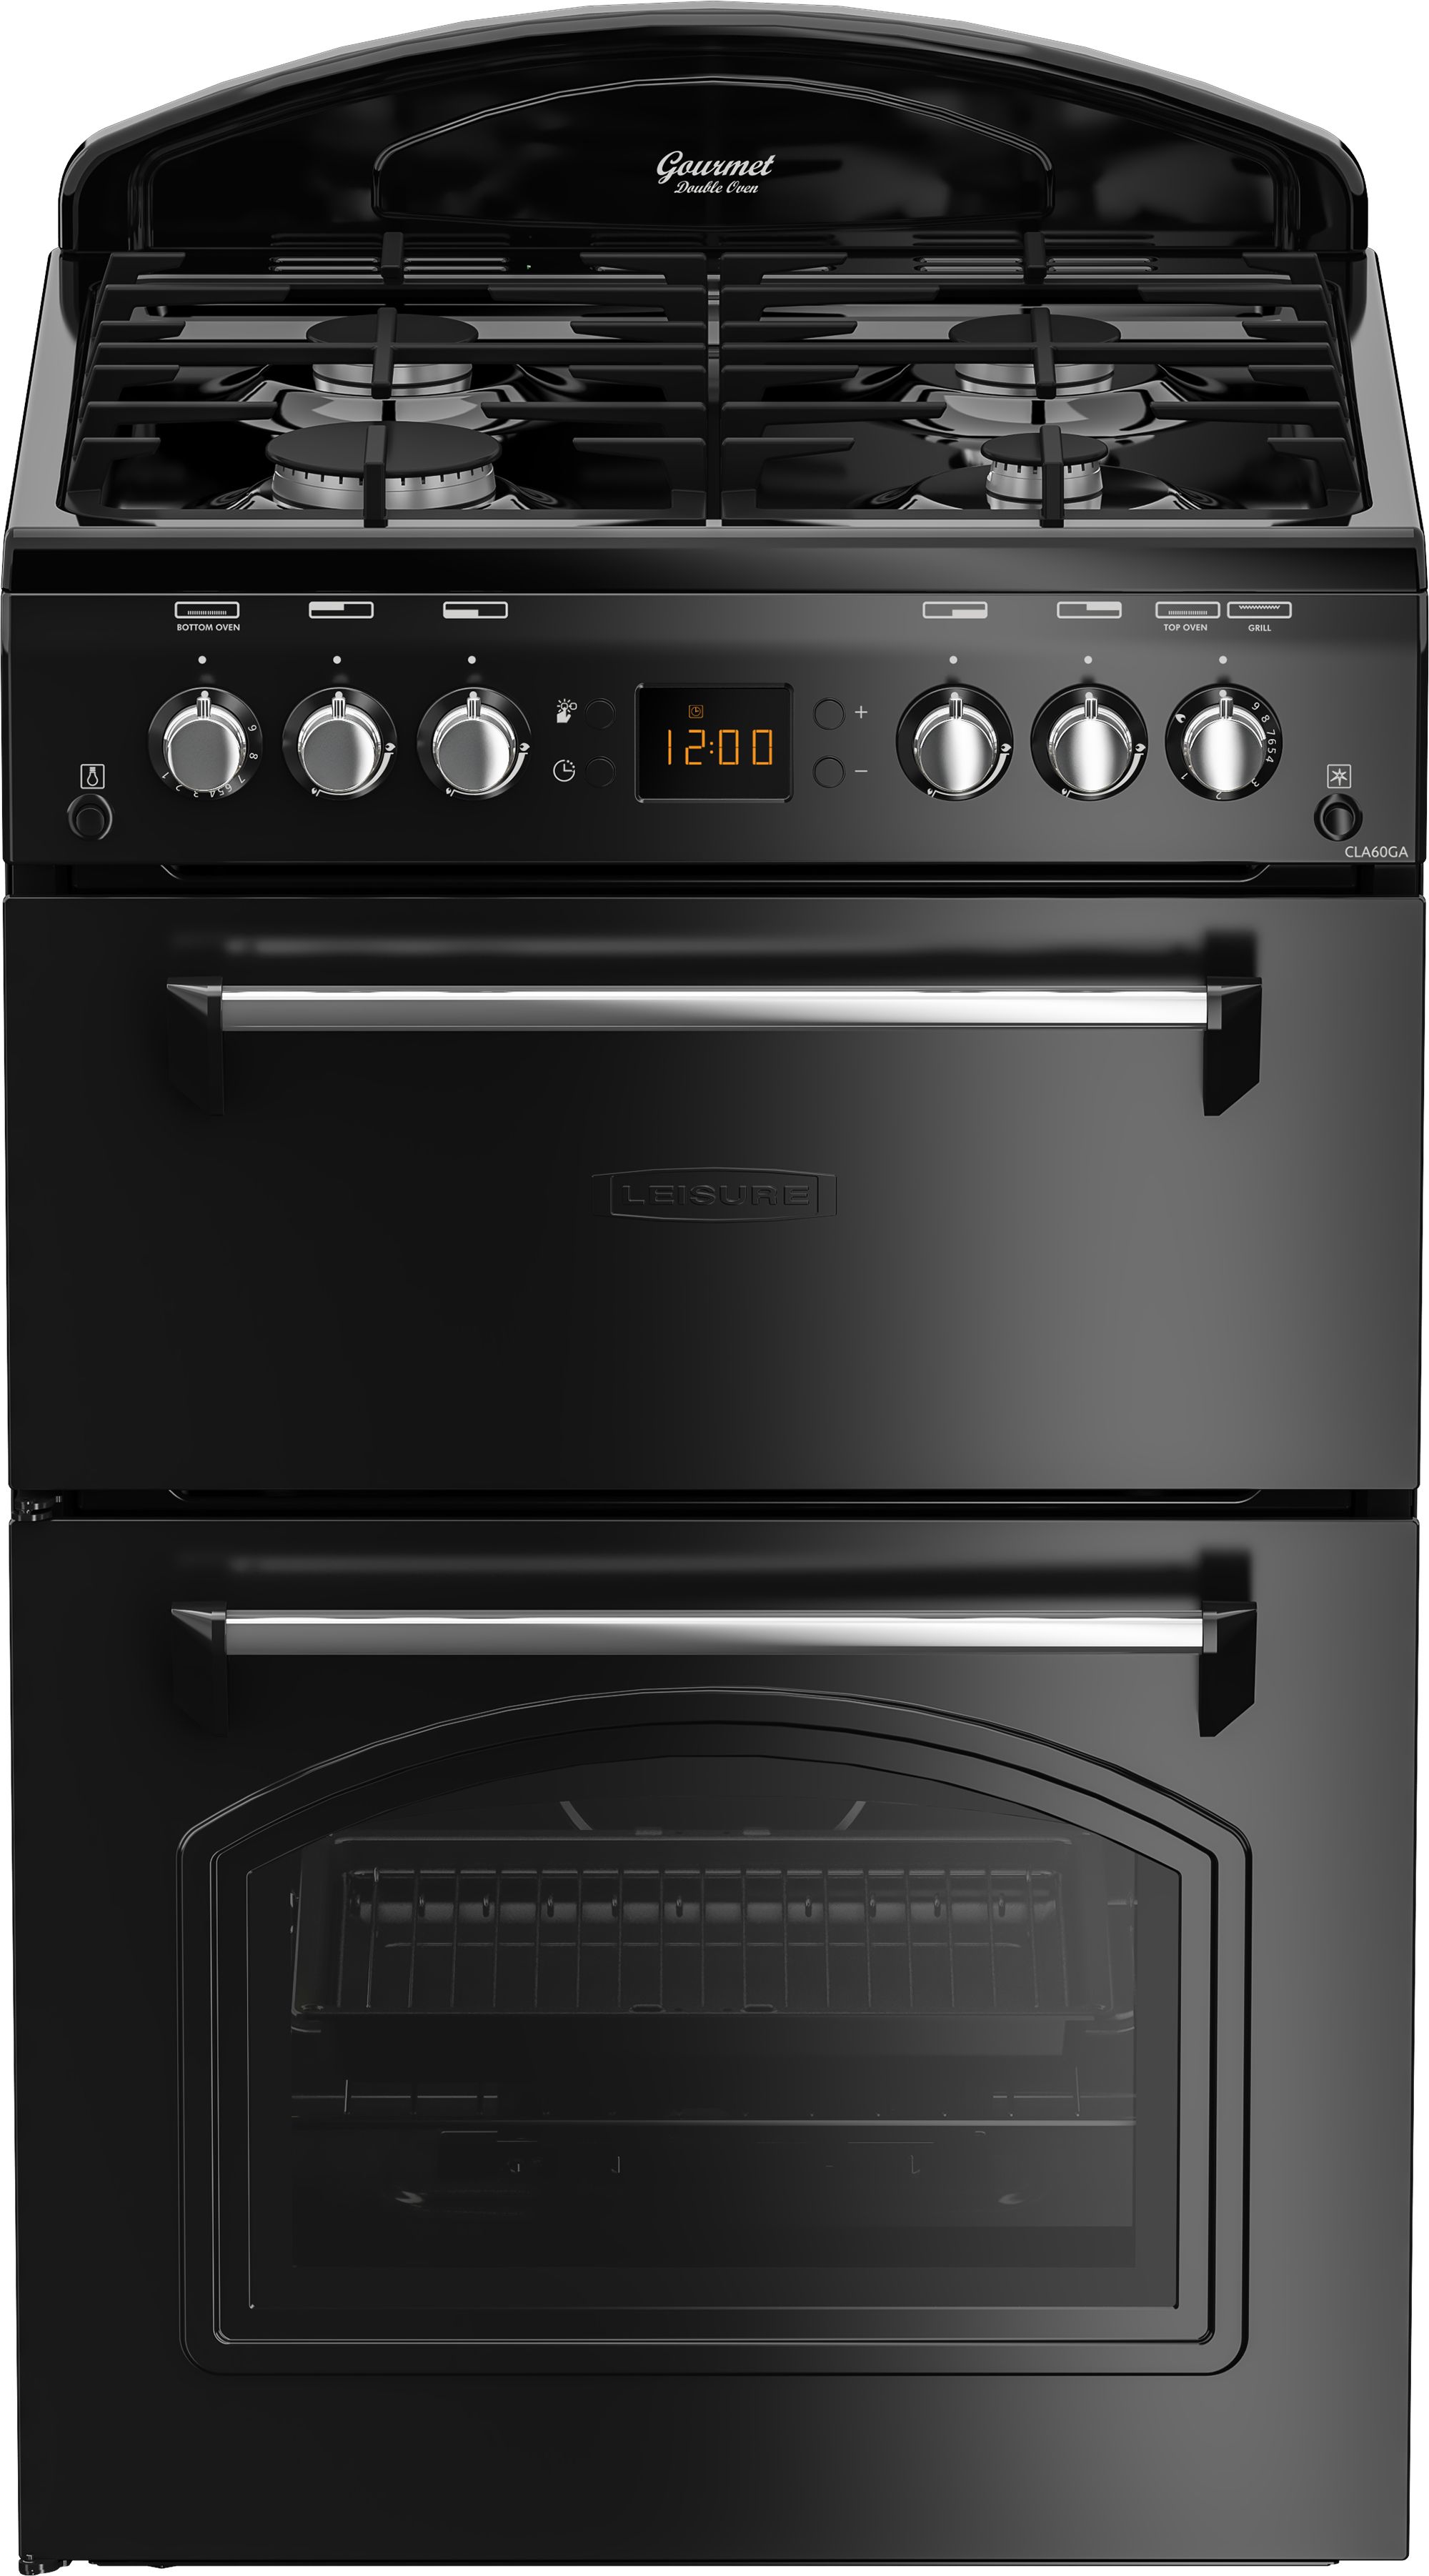 Leisure CLA60GAK 60cm Freestanding Gas Cooker with Variable grill - Black - A+ Rated, Black